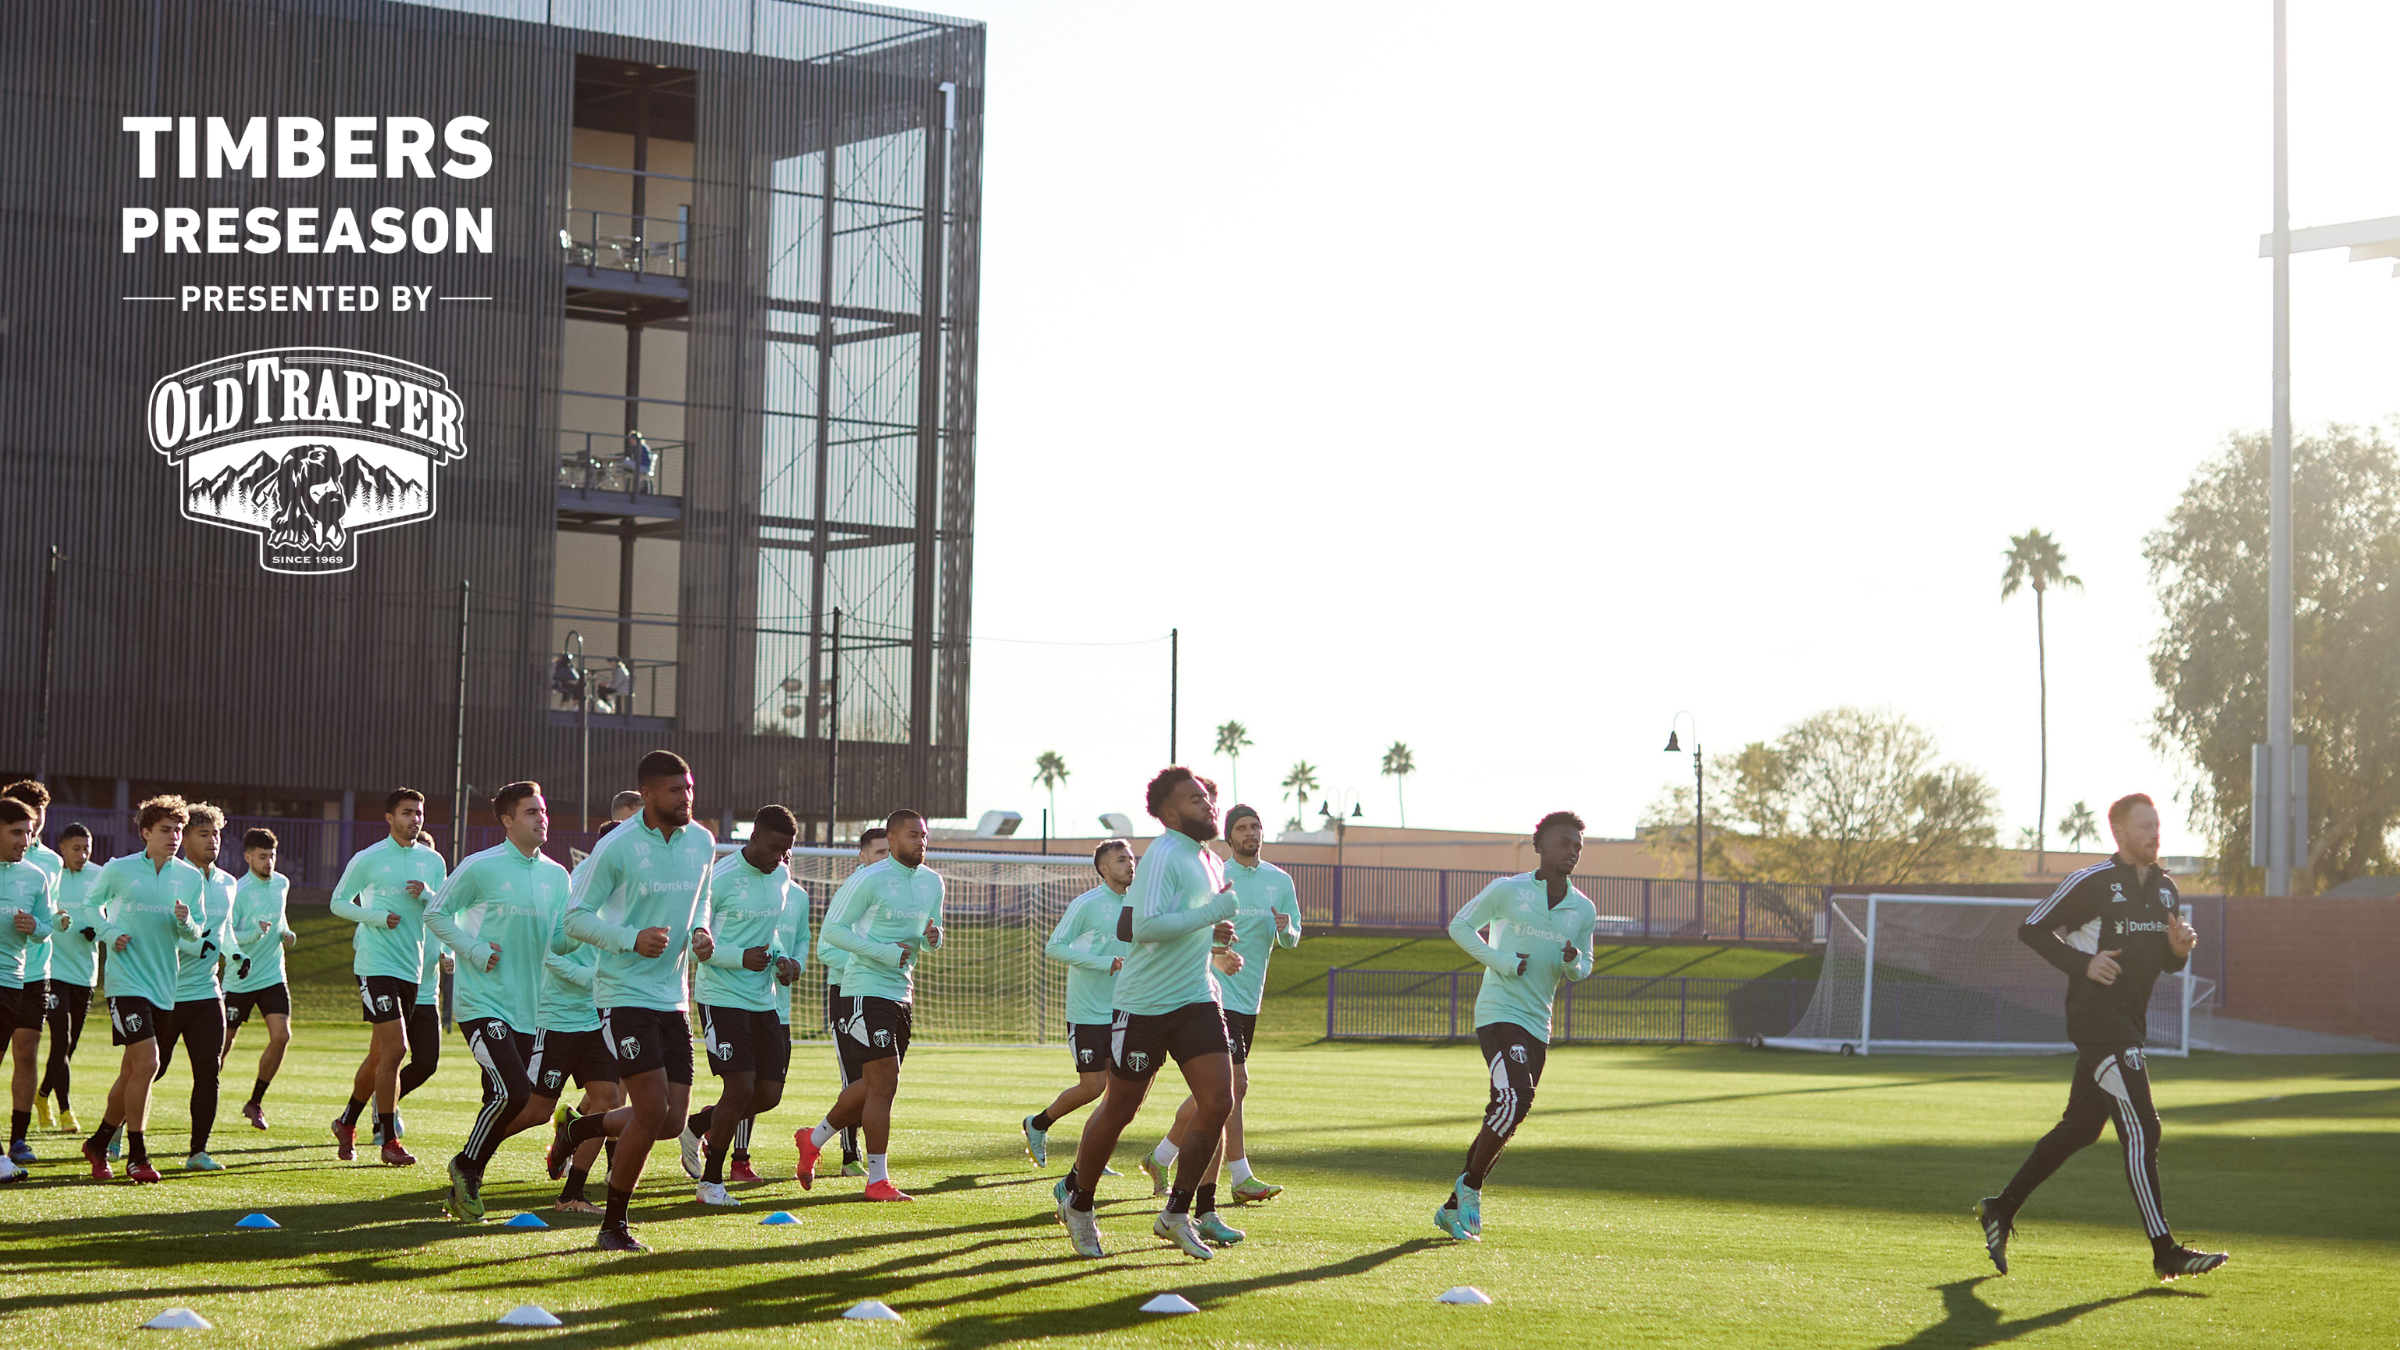 Behind the scenes at the Timbers training camp in Phoenix, Arizona